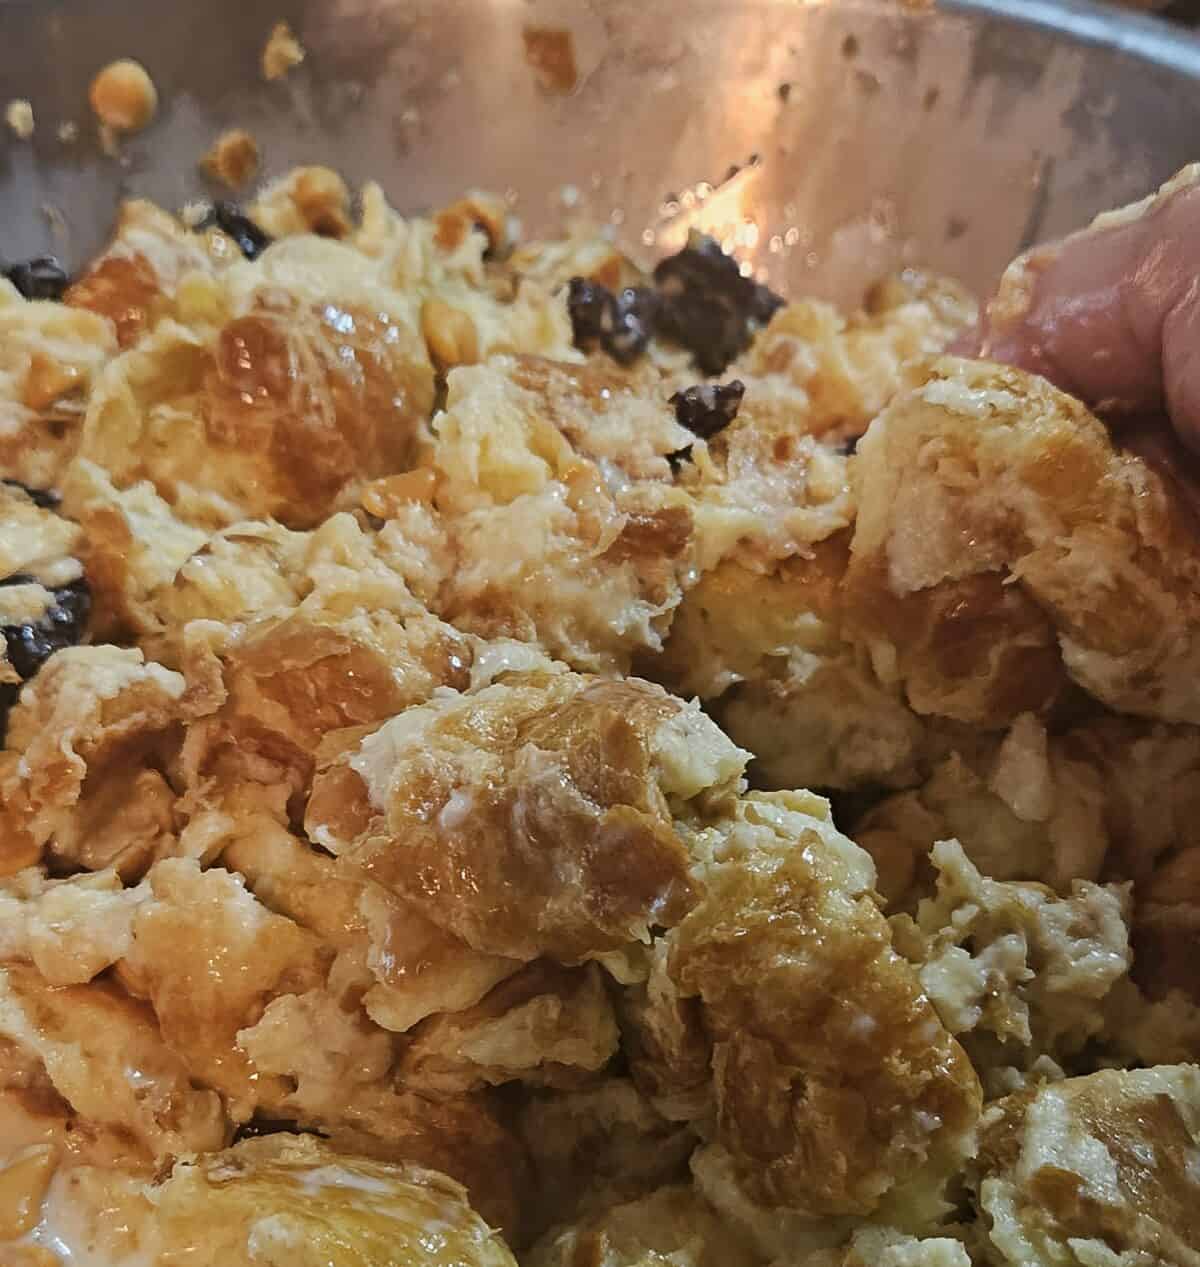 bread pudding mixture being mixed together by hand in a mixing bowl